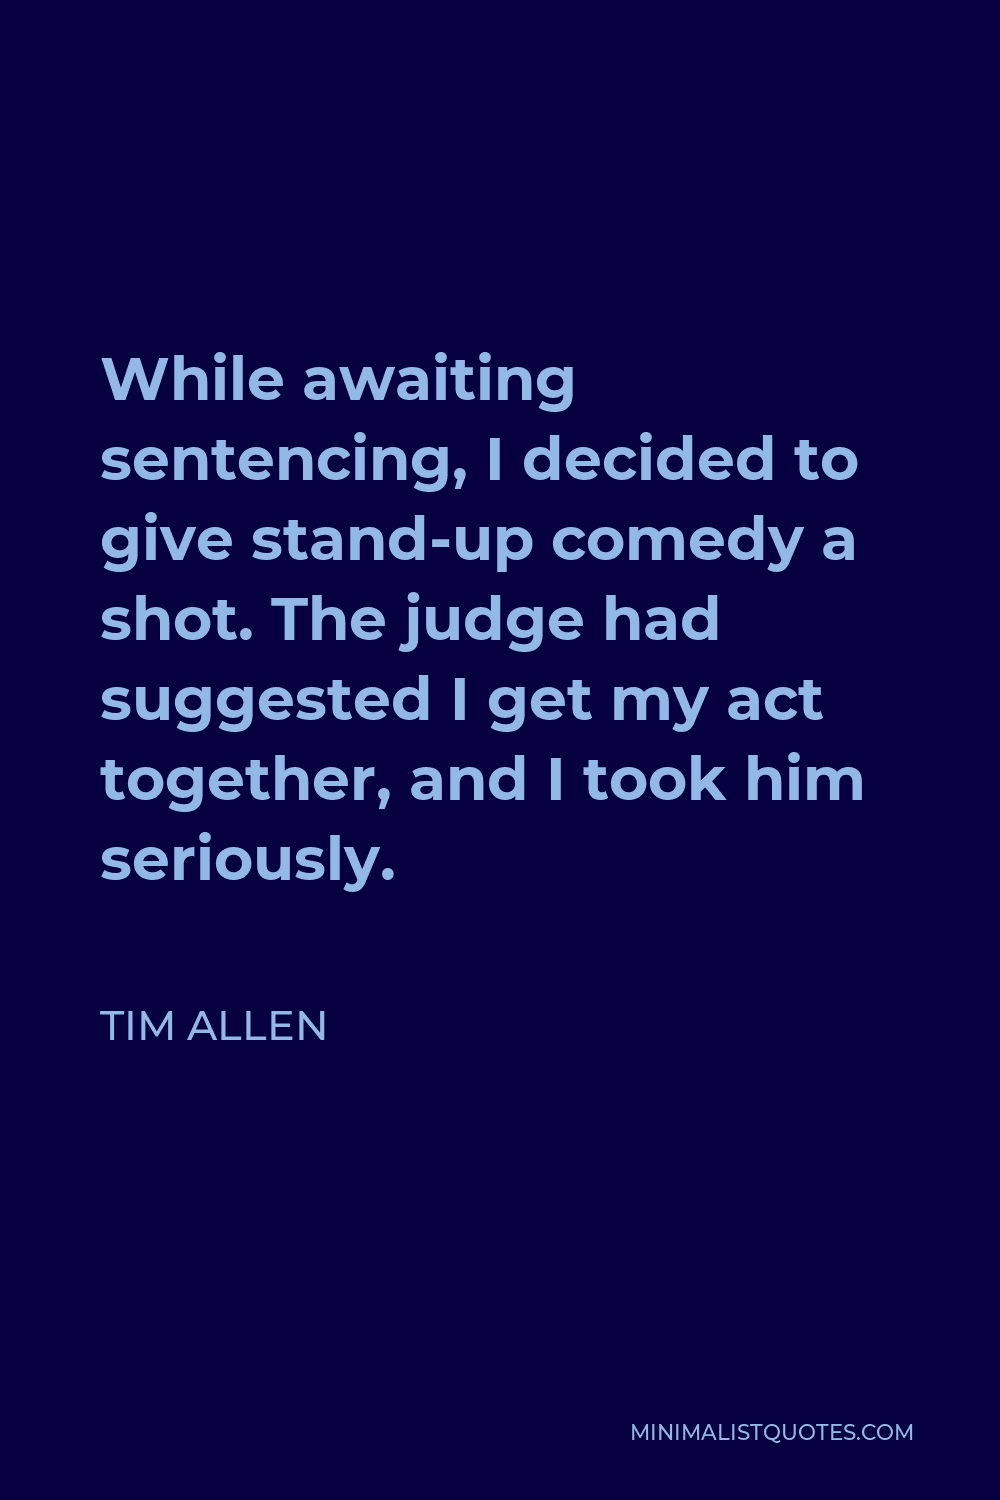 Tim Allen Quote - While awaiting sentencing, I decided to give stand-up comedy a shot. The judge had suggested I get my act together, and I took him seriously.